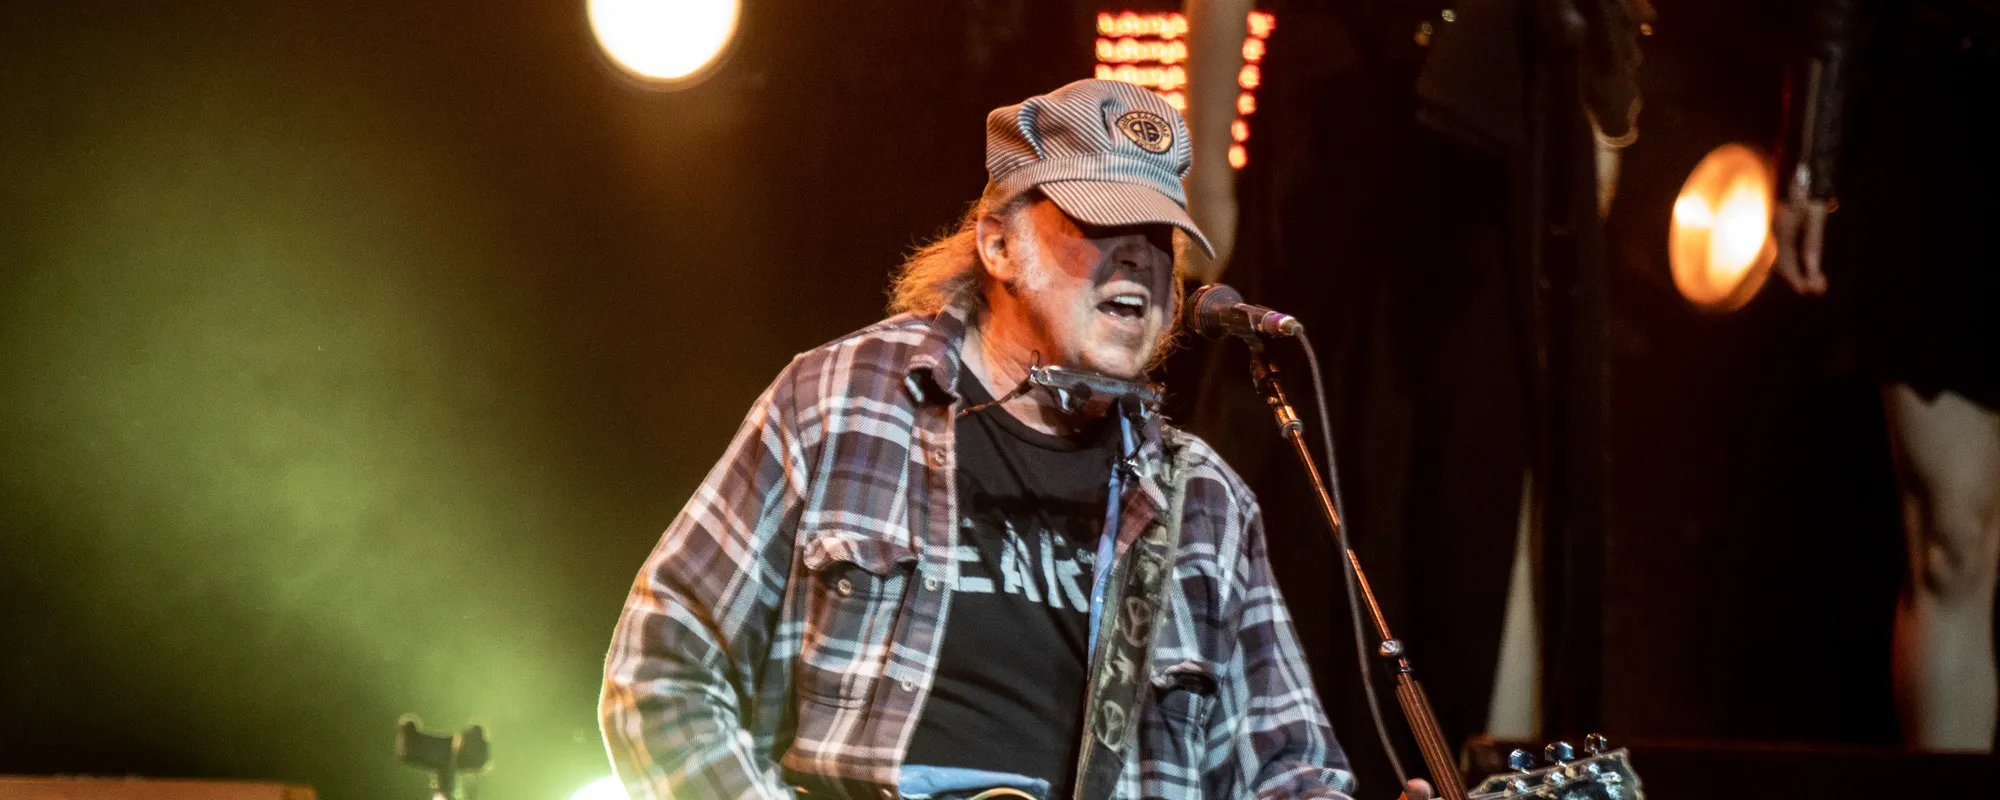 Neil Young Announces 50th Anniversary Release of ‘Time Fades Away’